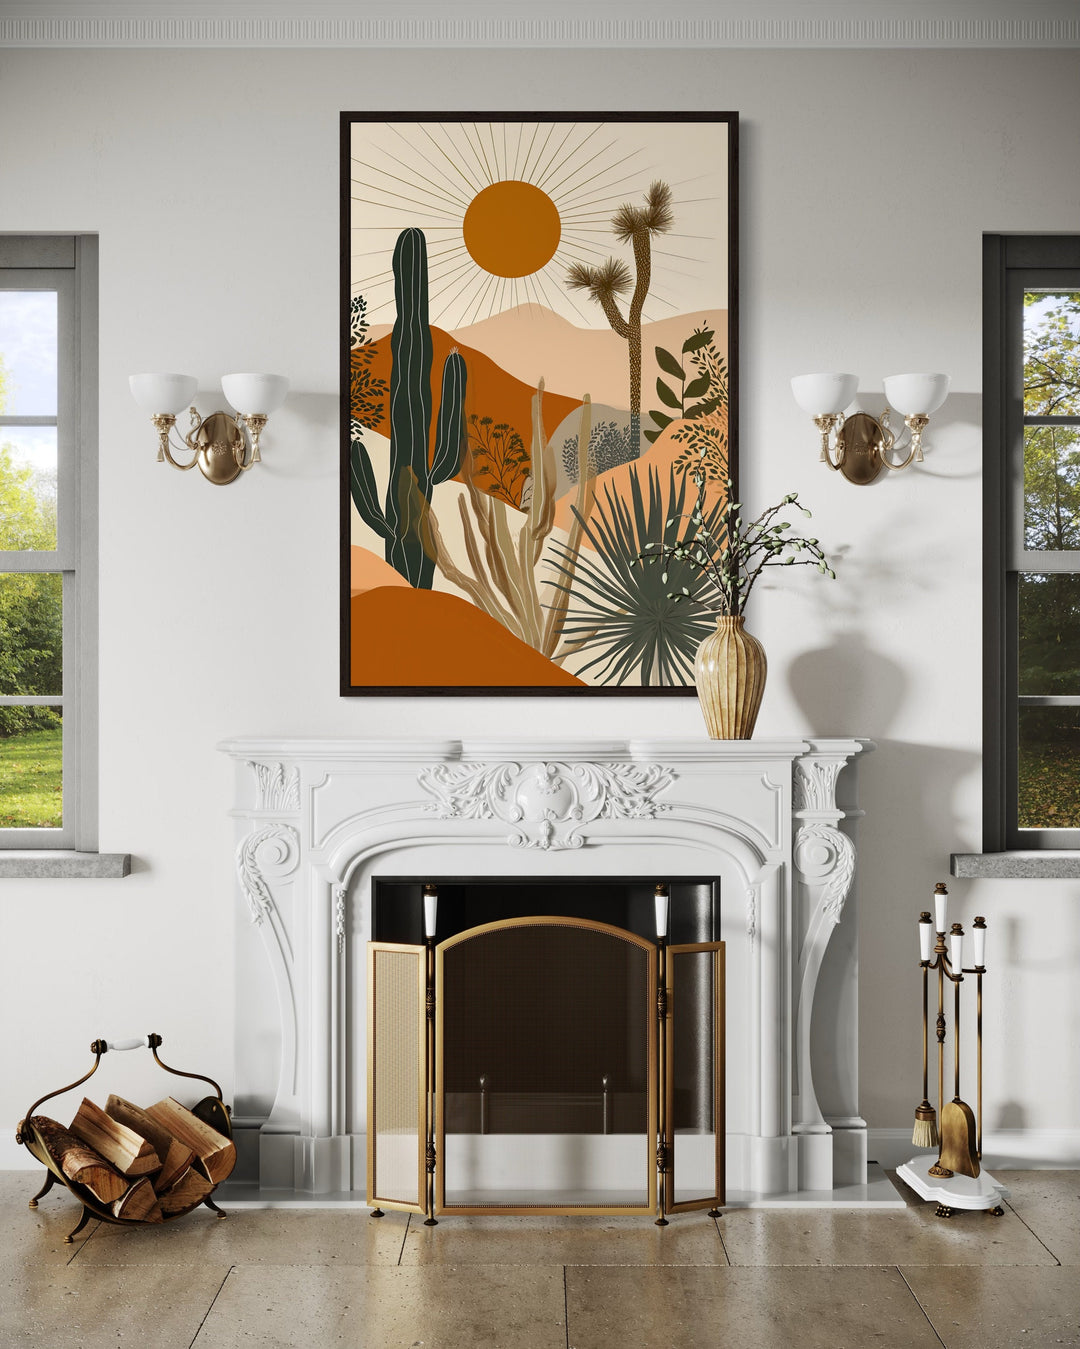 Boho Saguaro Cactus With Sun In The Desert Framed Canvas Wall Art above fireplace